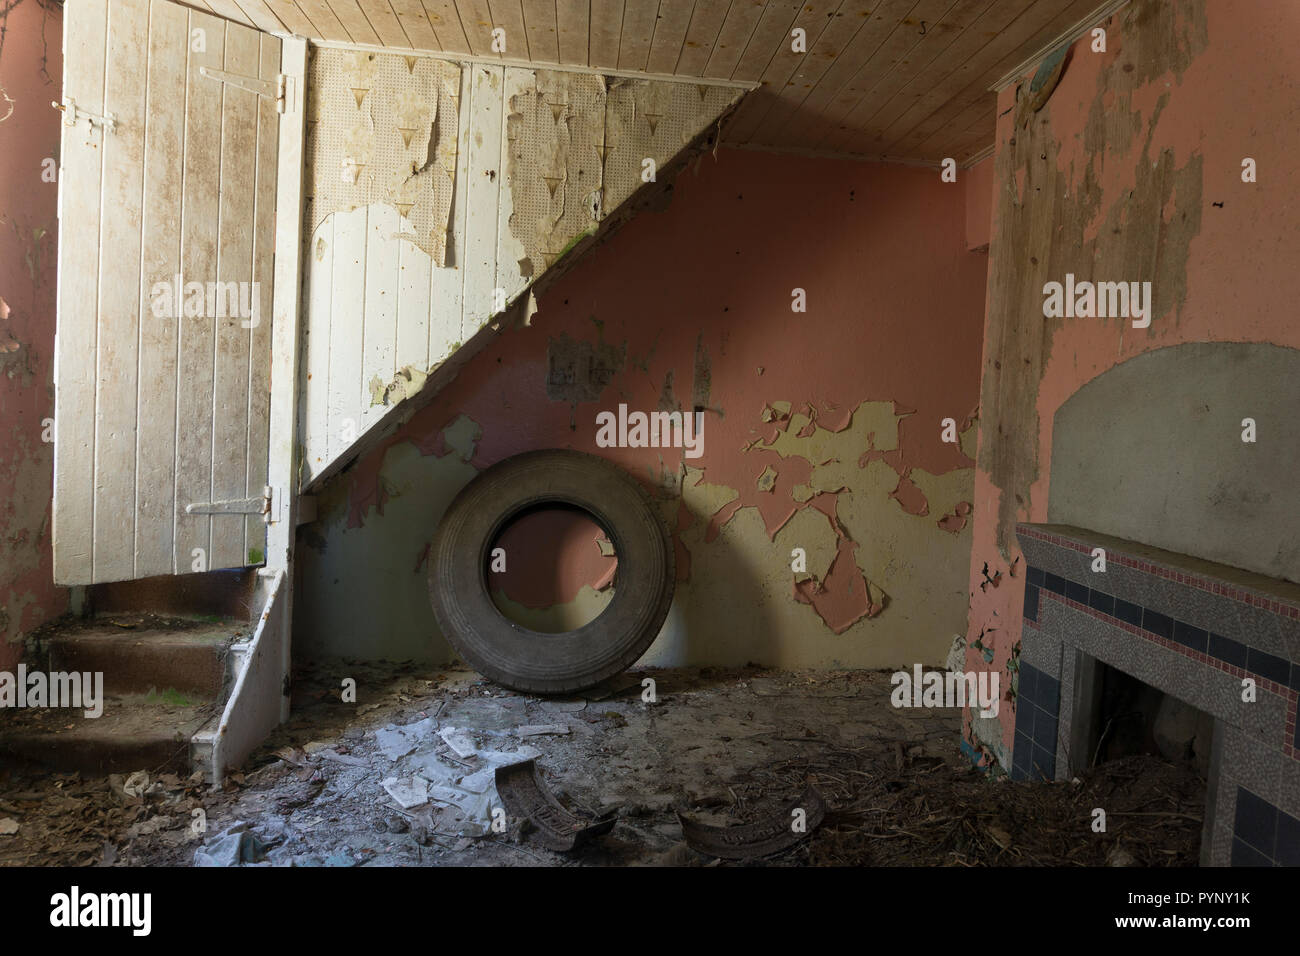 Staircase, with old truck tyre underneath, in an old derelict cottage. Floor strewn with peeled paint and wallpaper, with old fireplace to one side. Stock Photo